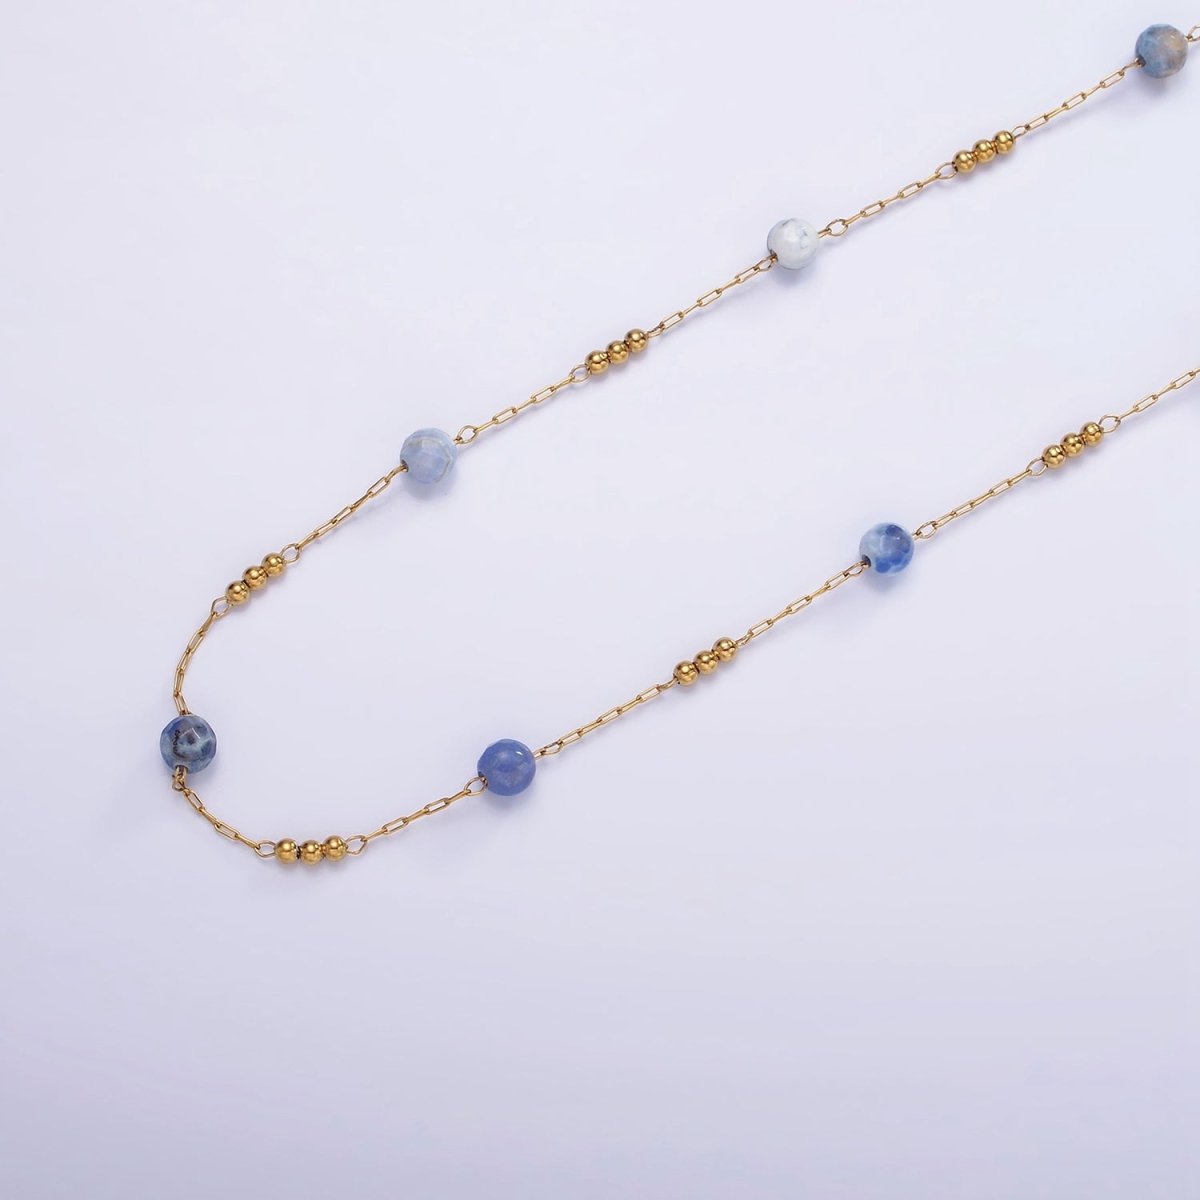 Natural Gemstone Beaded Chain Rosary Chain by Yard 4mm Blue Aventurine Beads by Yard | ROLL-1476 - DLUXCA